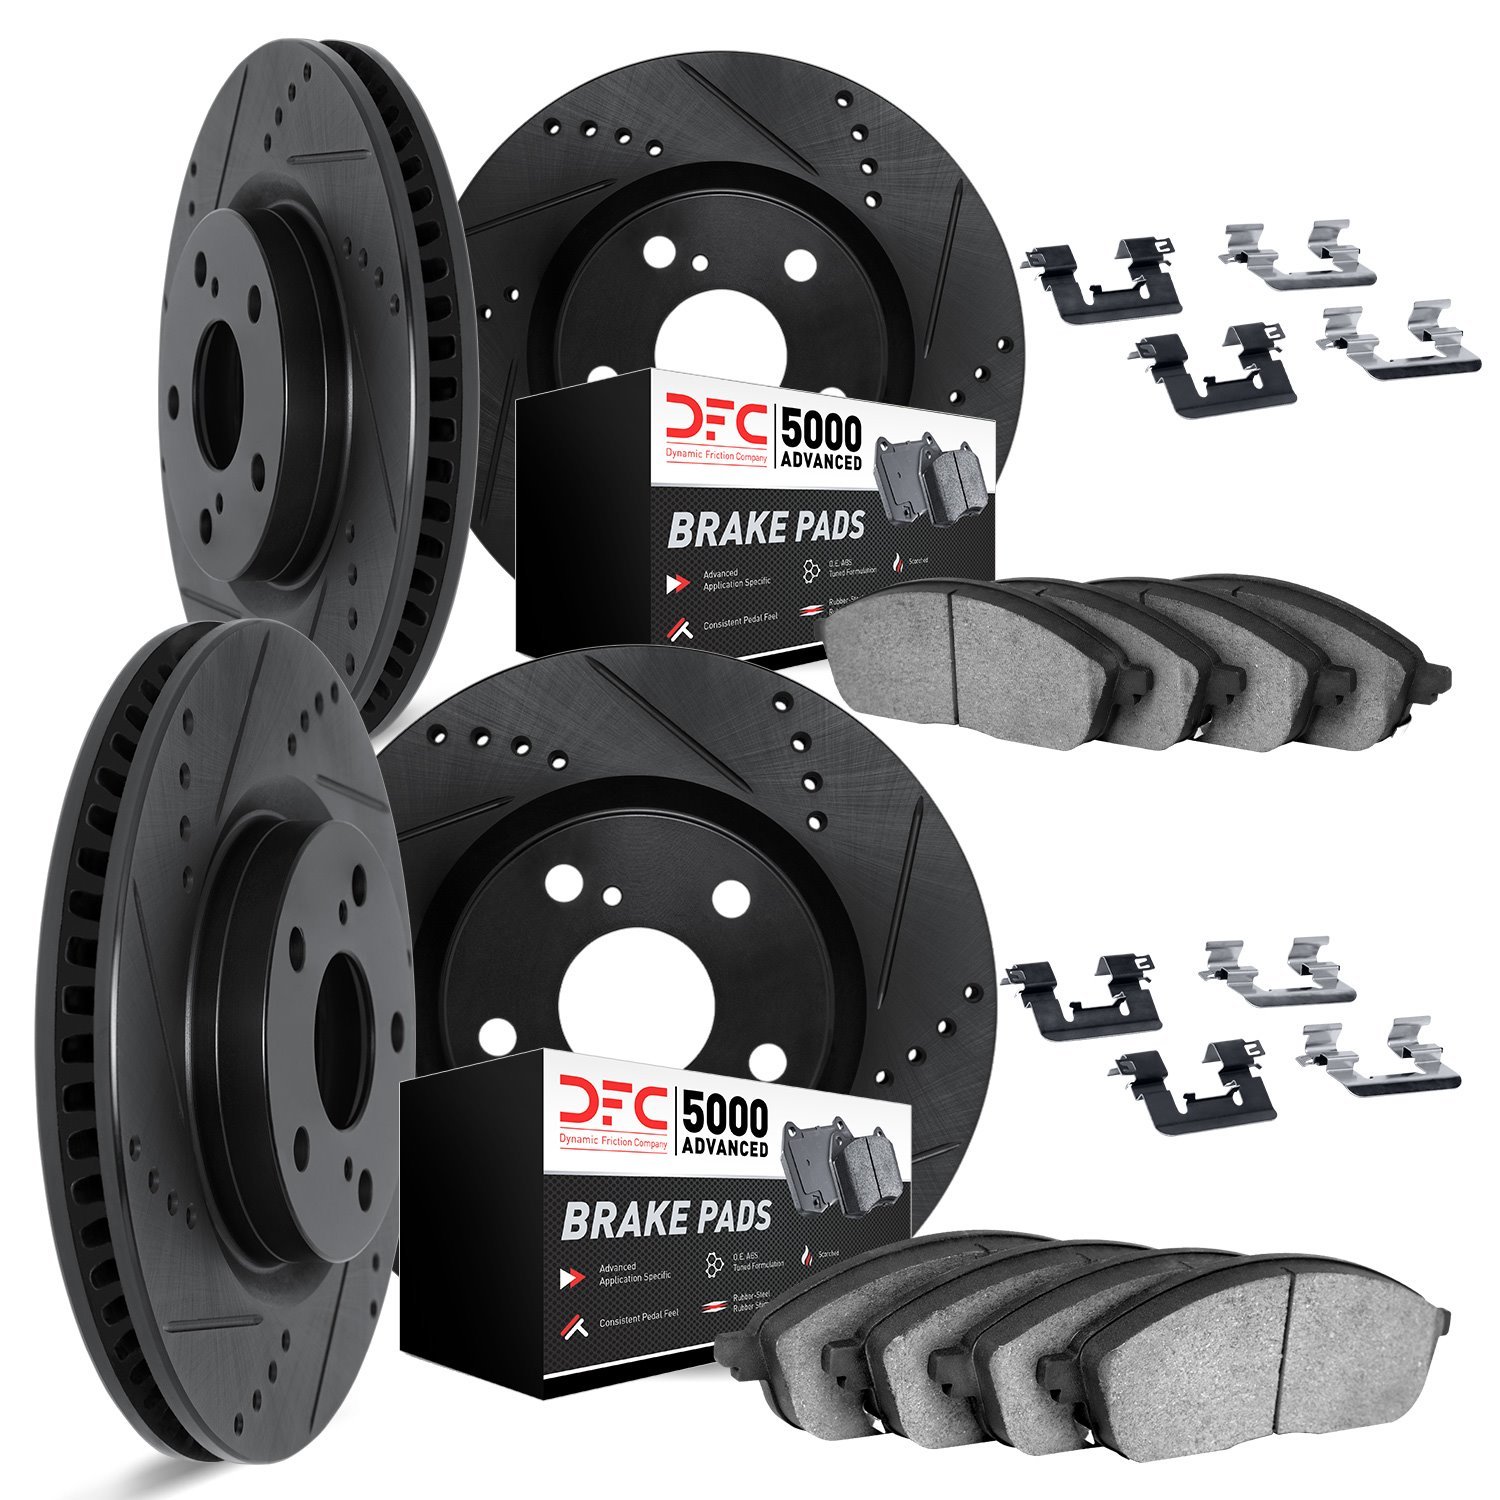 8514-31038 Drilled/Slotted Brake Rotors w/5000 Advanced Brake Pads Kit & Hardware [Black], 2010-2017 BMW, Position: Front and Re